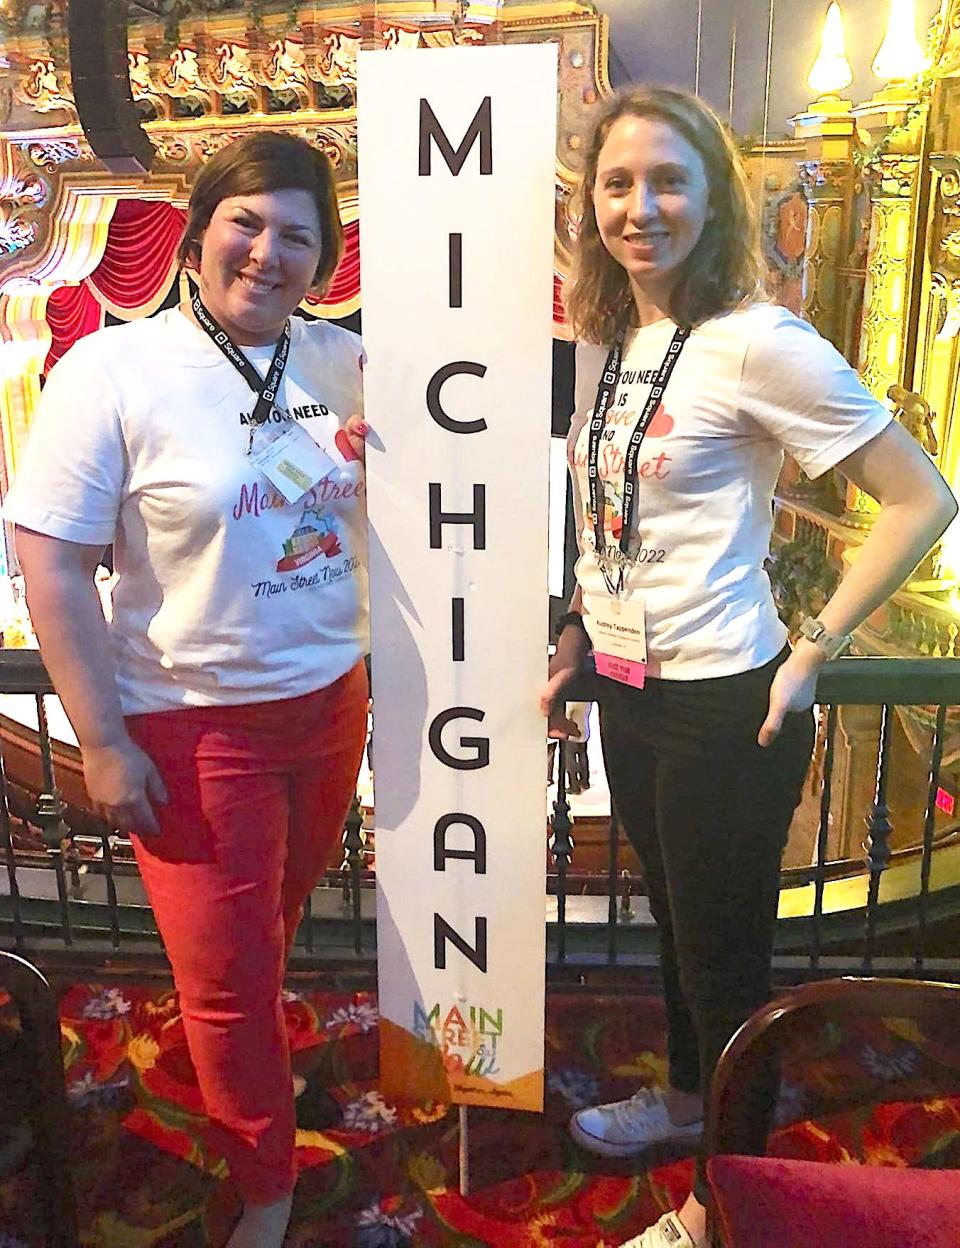 Courtney Dirschell and Audrey Tappenden of the Coldwater Main Street board recently attended a Main Street NOW conference in Richmond, Va.